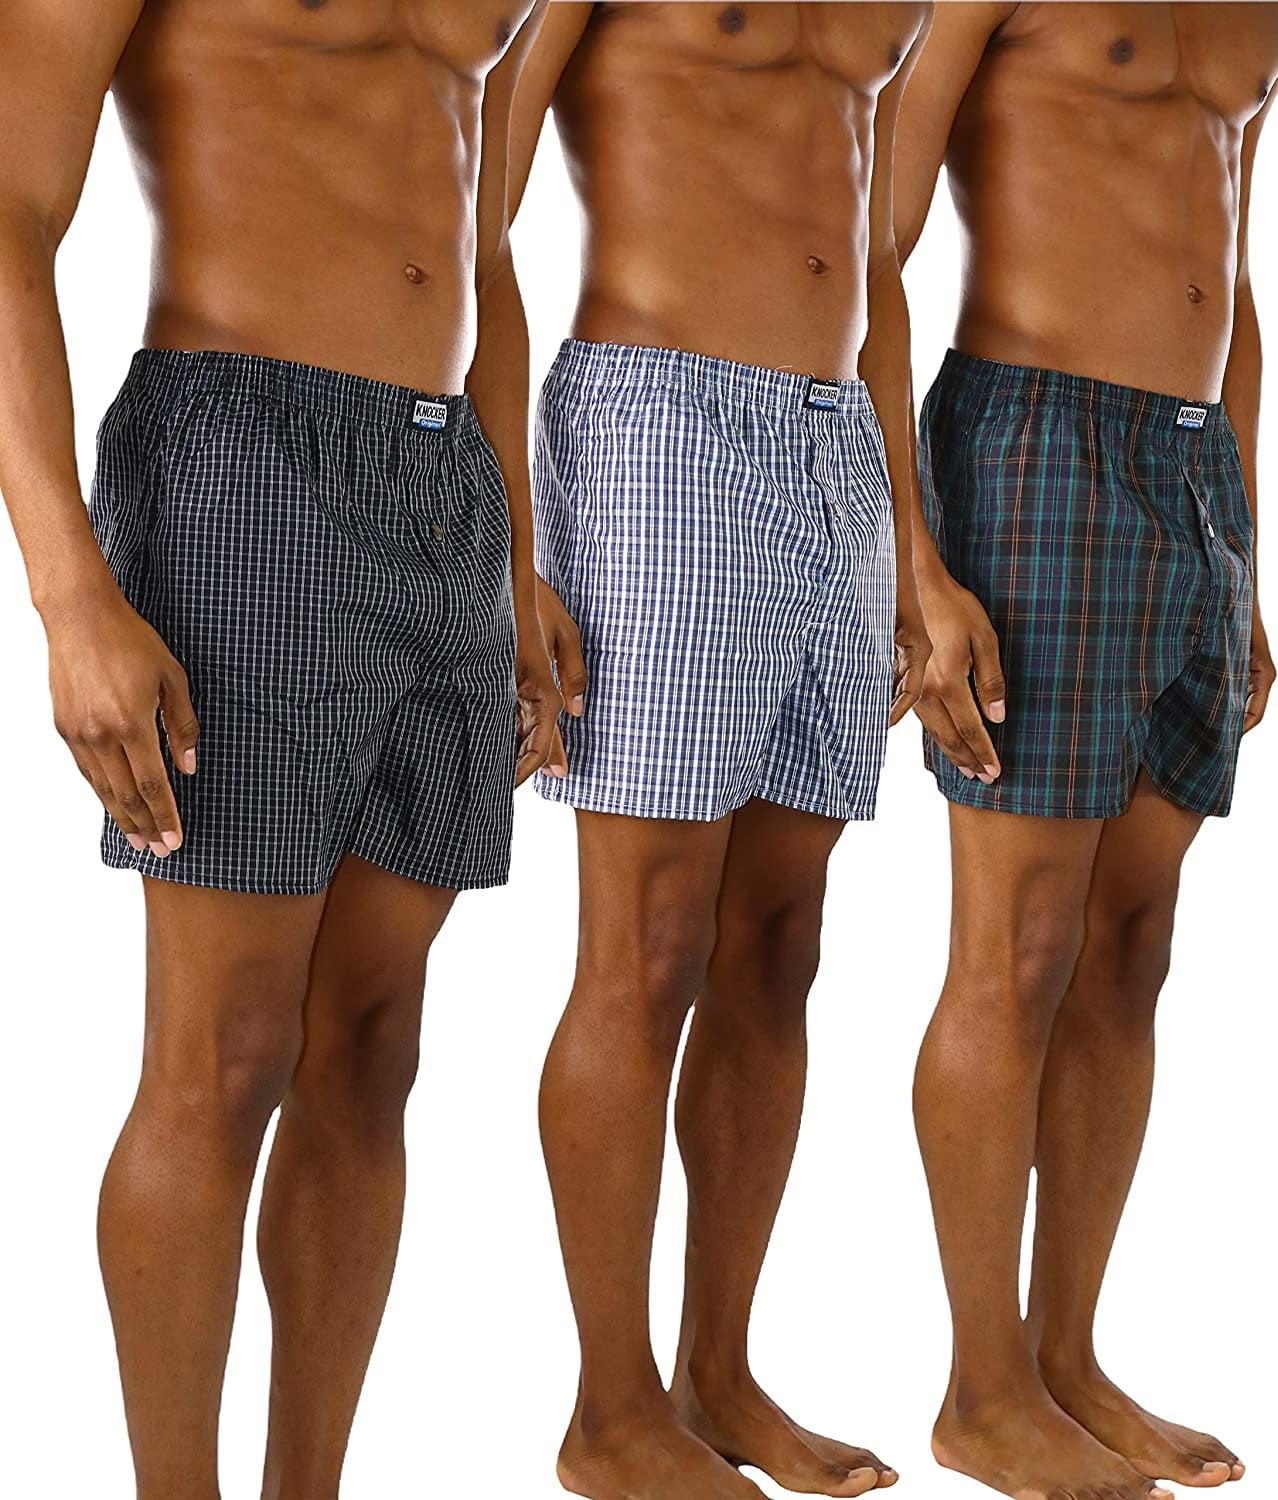 Gaff Boxer Shorts - With All-Round Padding - Maybe This Pair